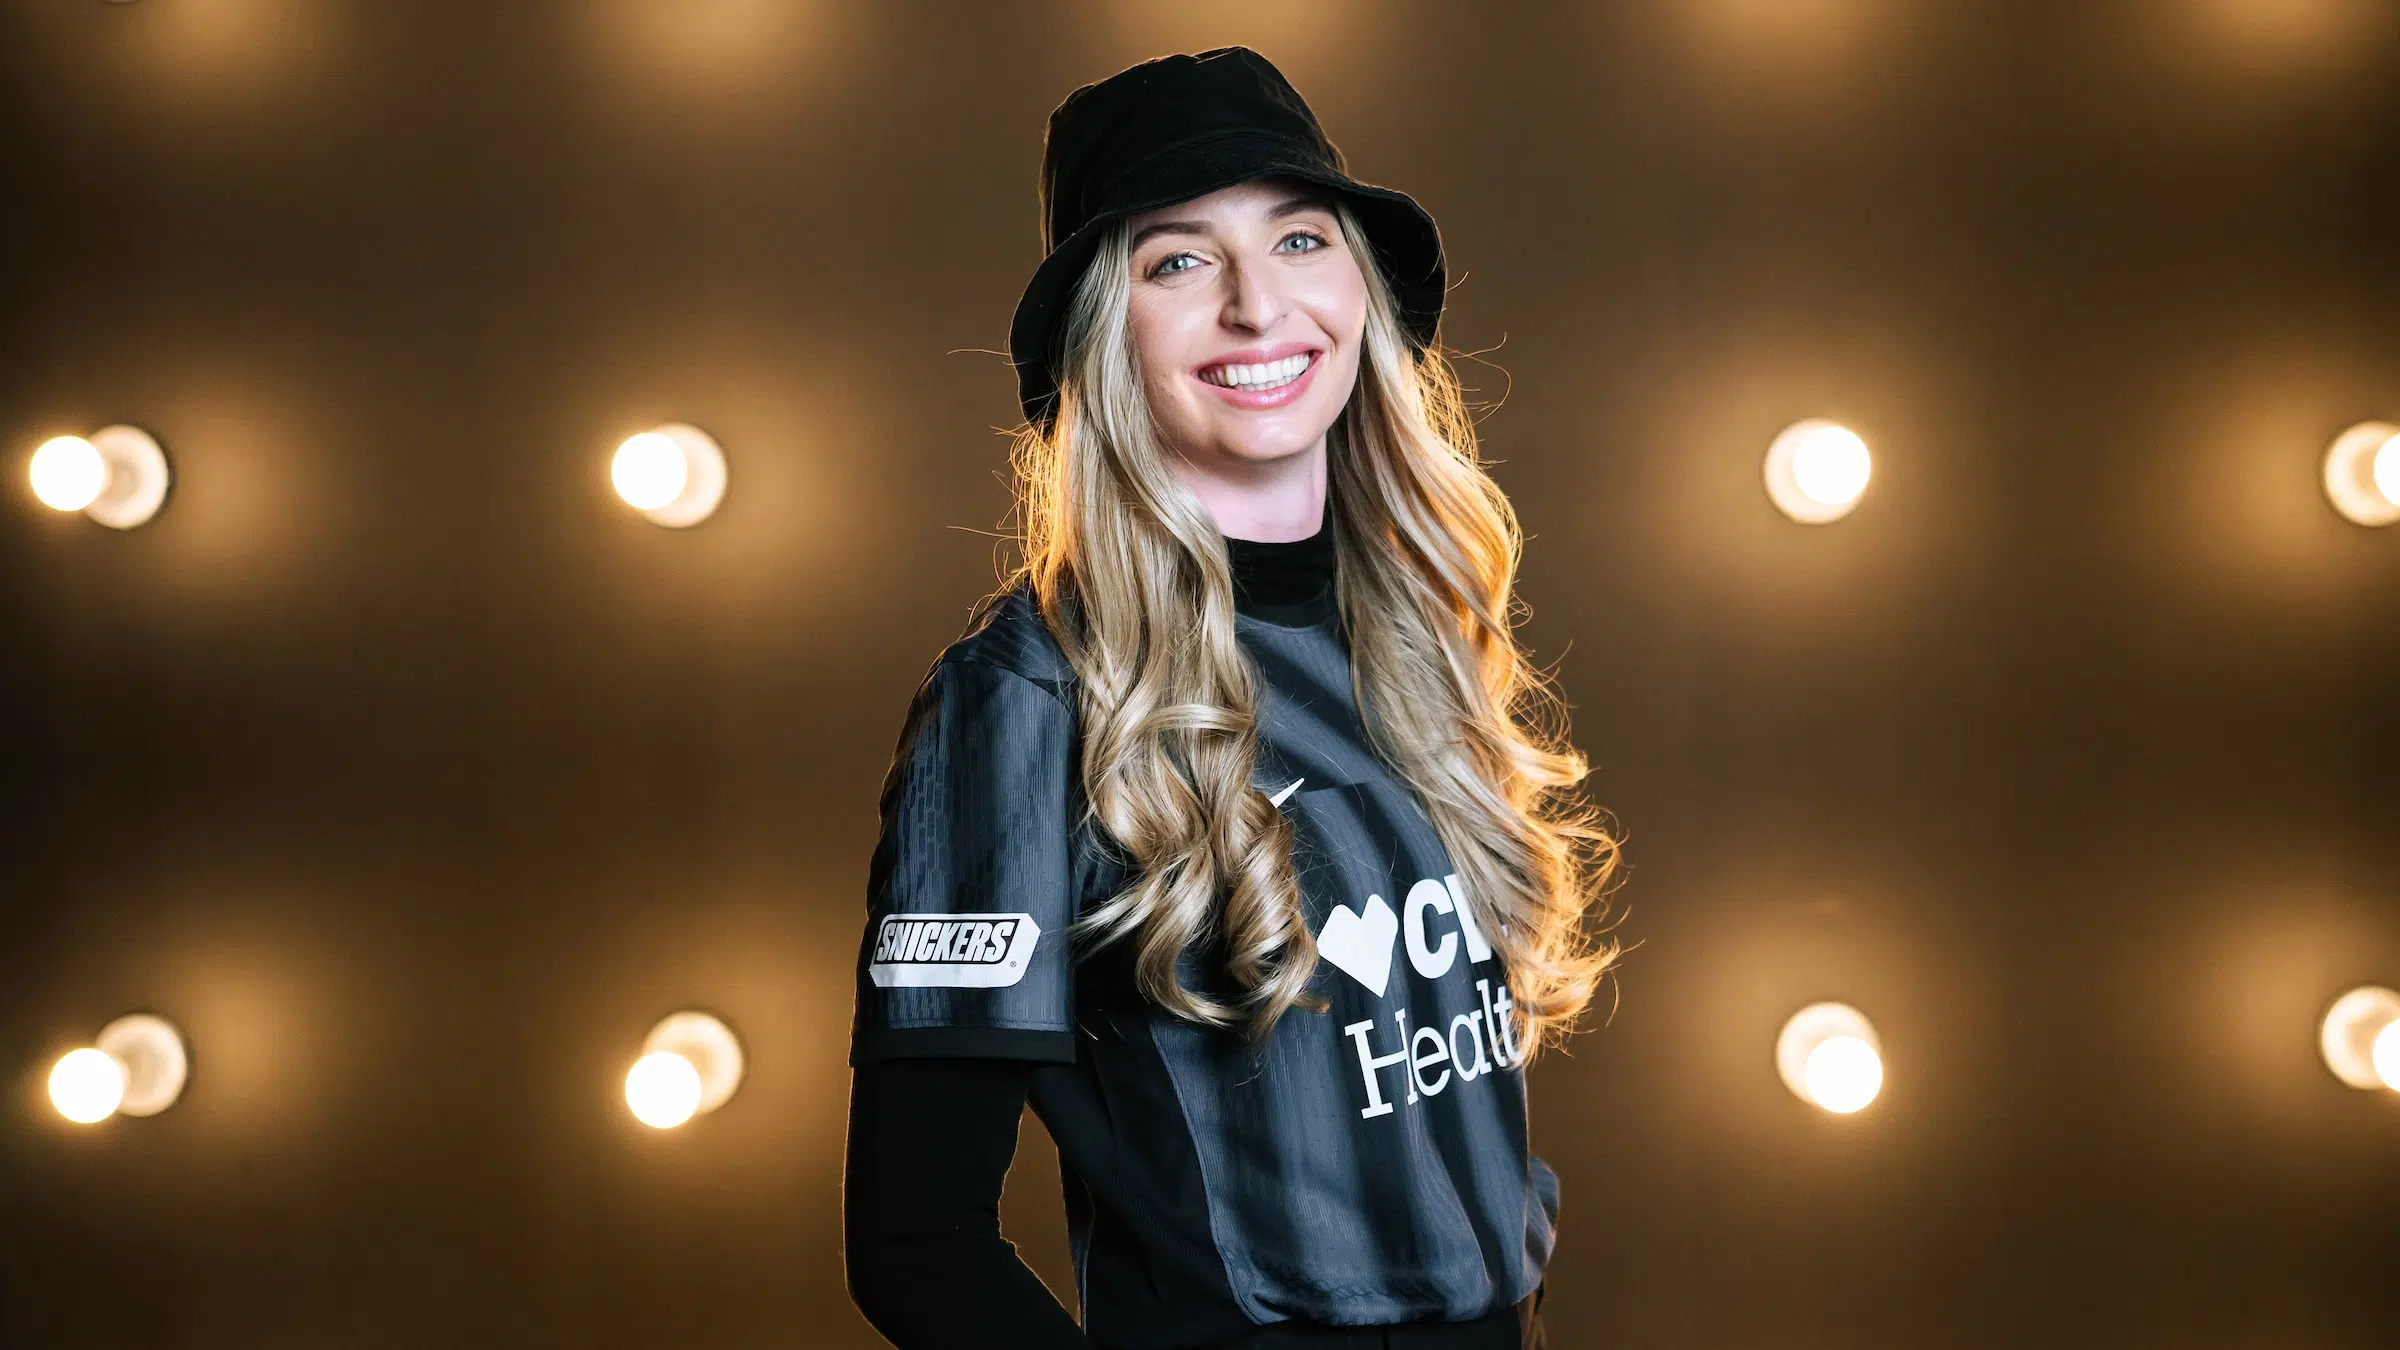 Gabby Carle in a black Spirit jersey and a black bucket hat in front of a wall of light bulbs.